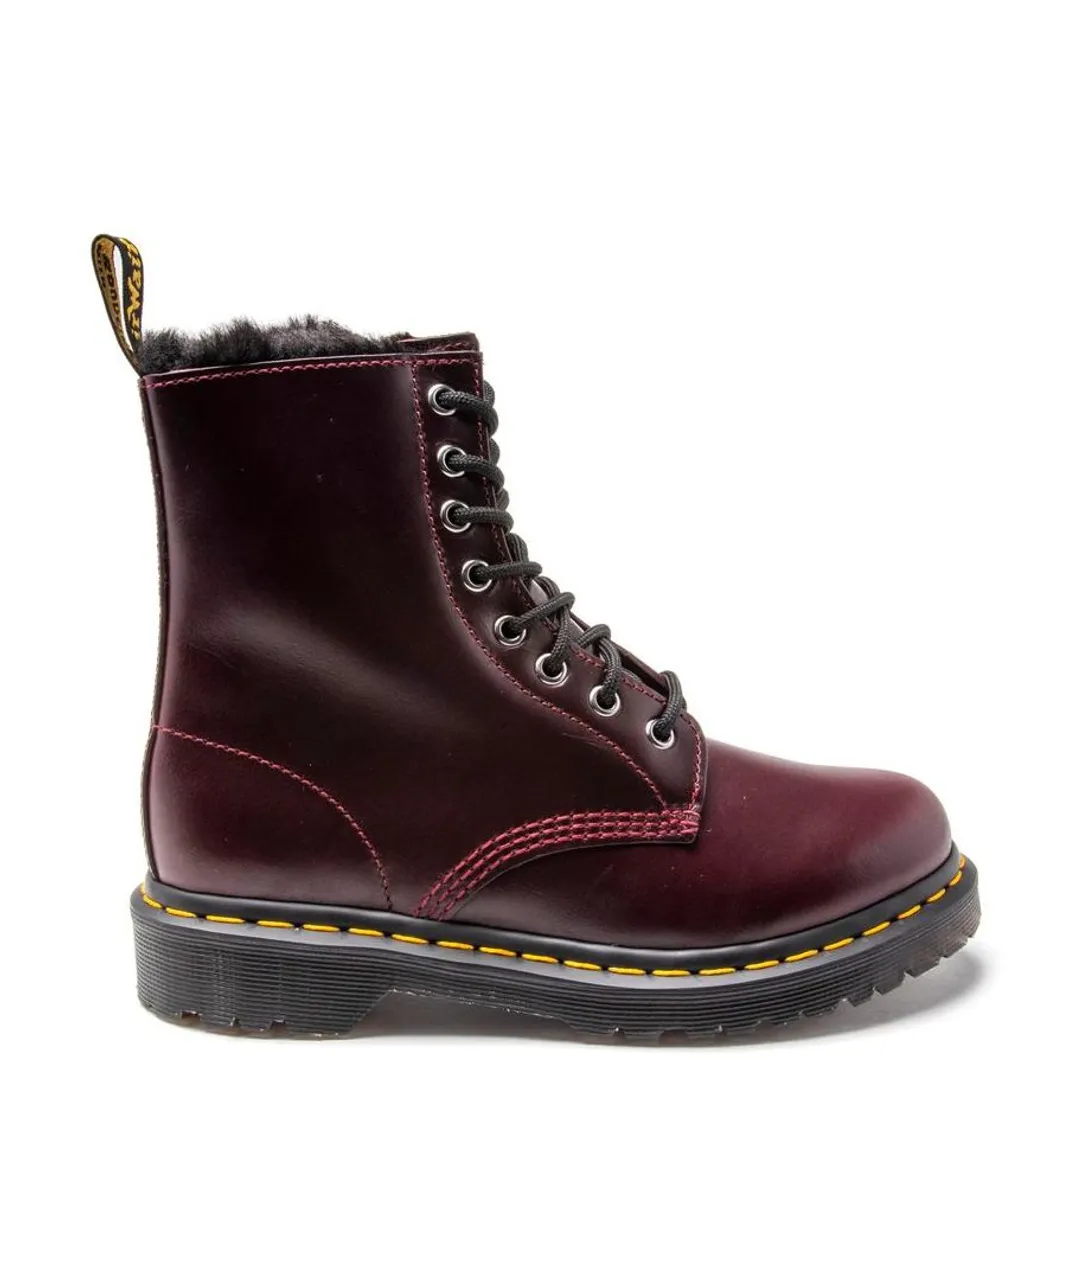 Dr Martens Womens 1460 Serena Boots - Red